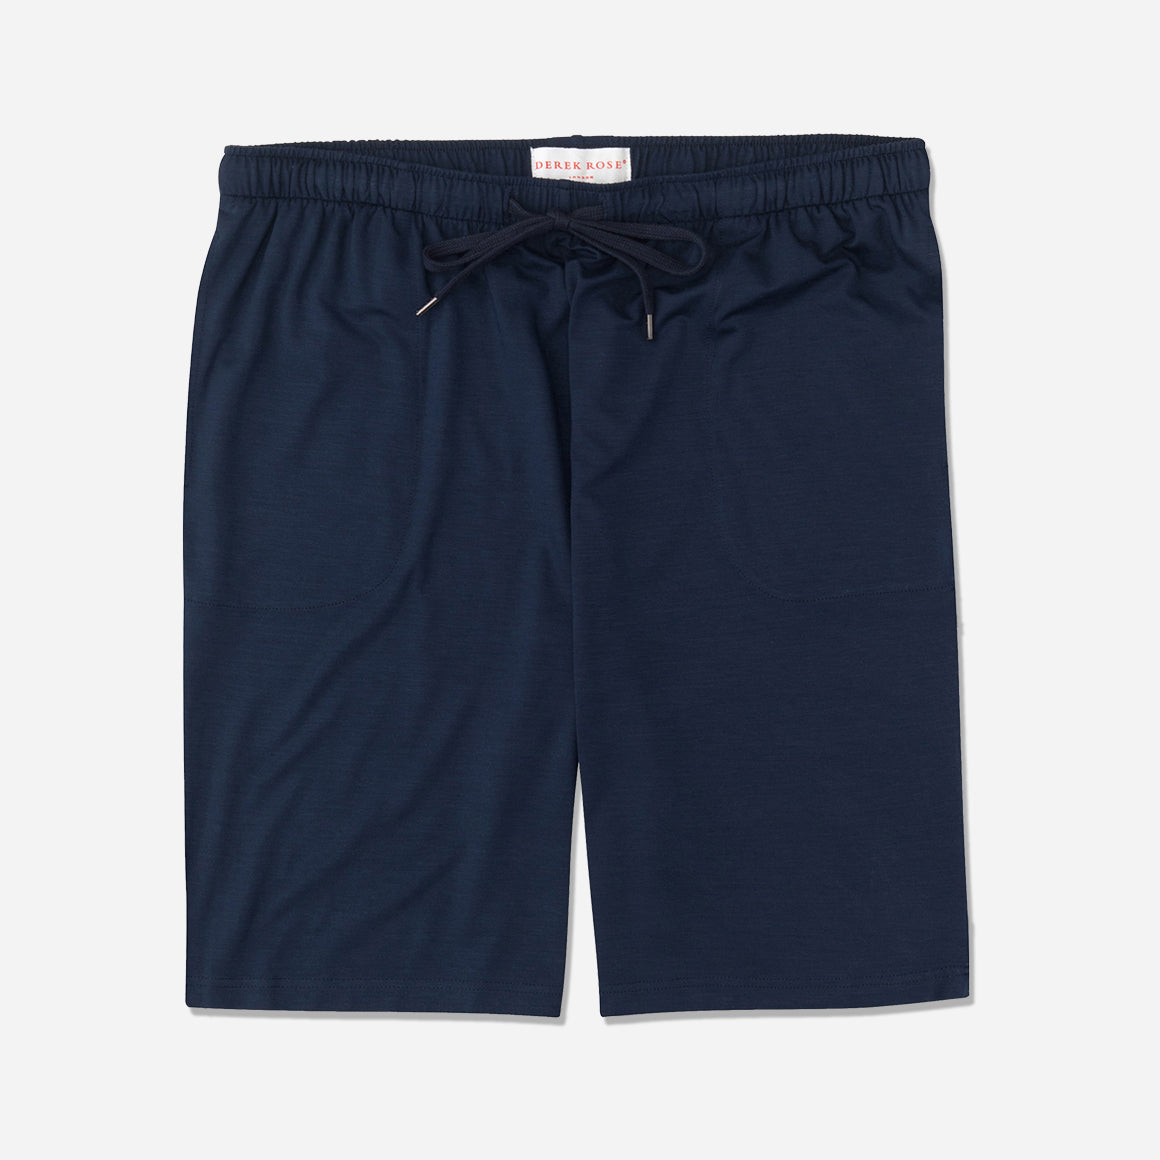 Derek Rose's Basel Micro Modal Lounge Short in a navy colorway. Shown against light grey background.